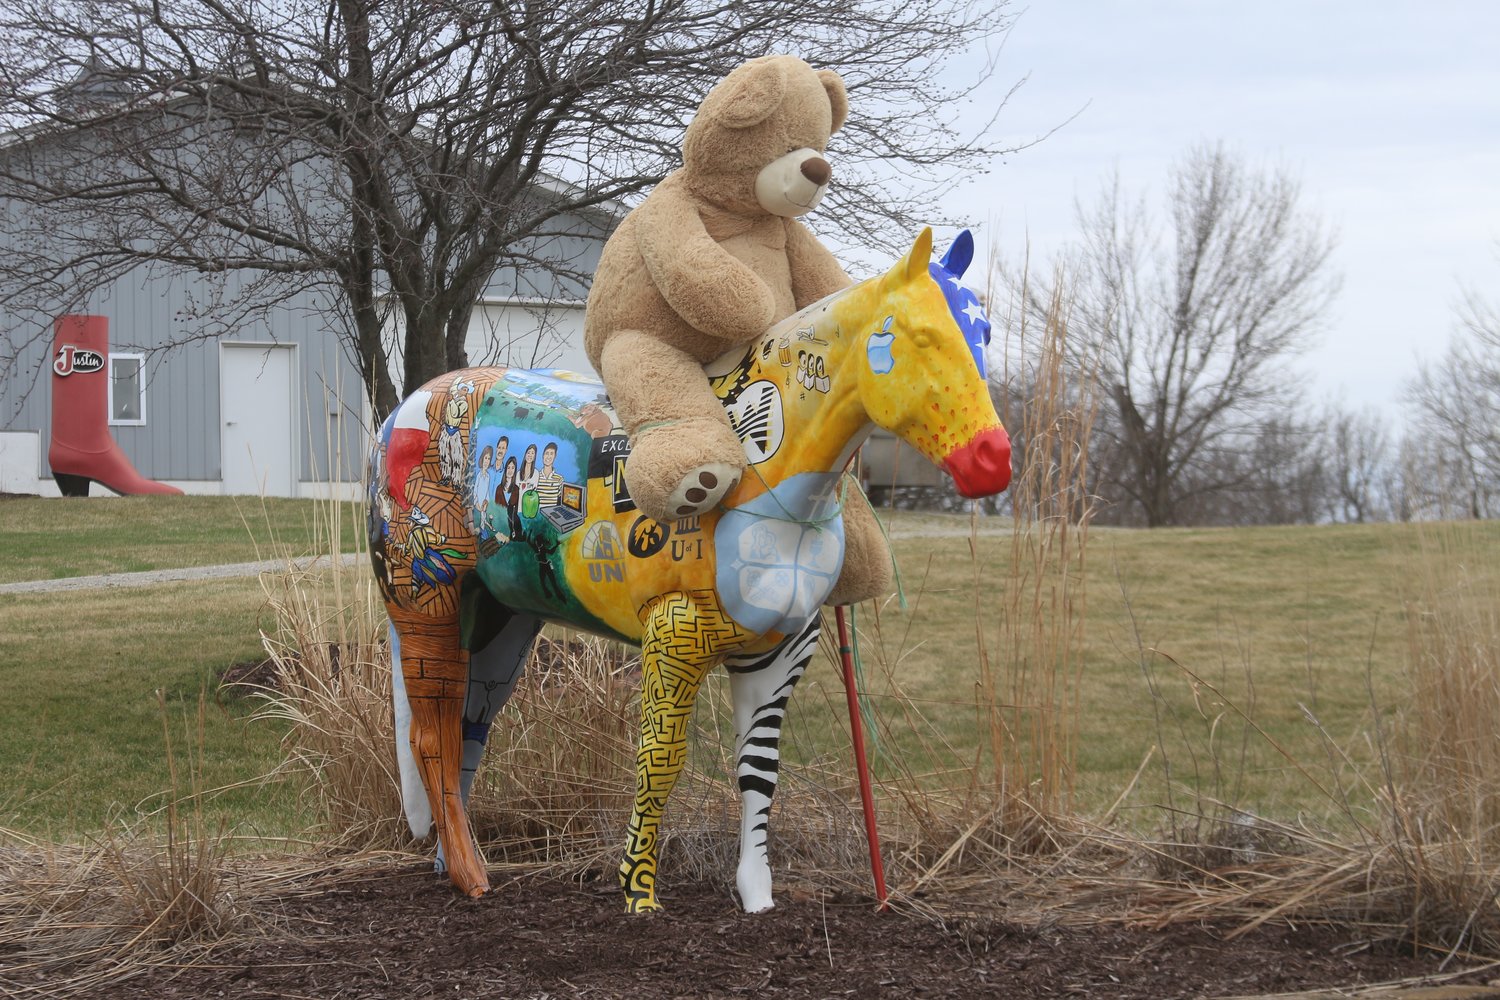 A giant teddy bear was seen atop a horse at Mid-Prairie Superintendent Mark Schneider’s home north of Wellman